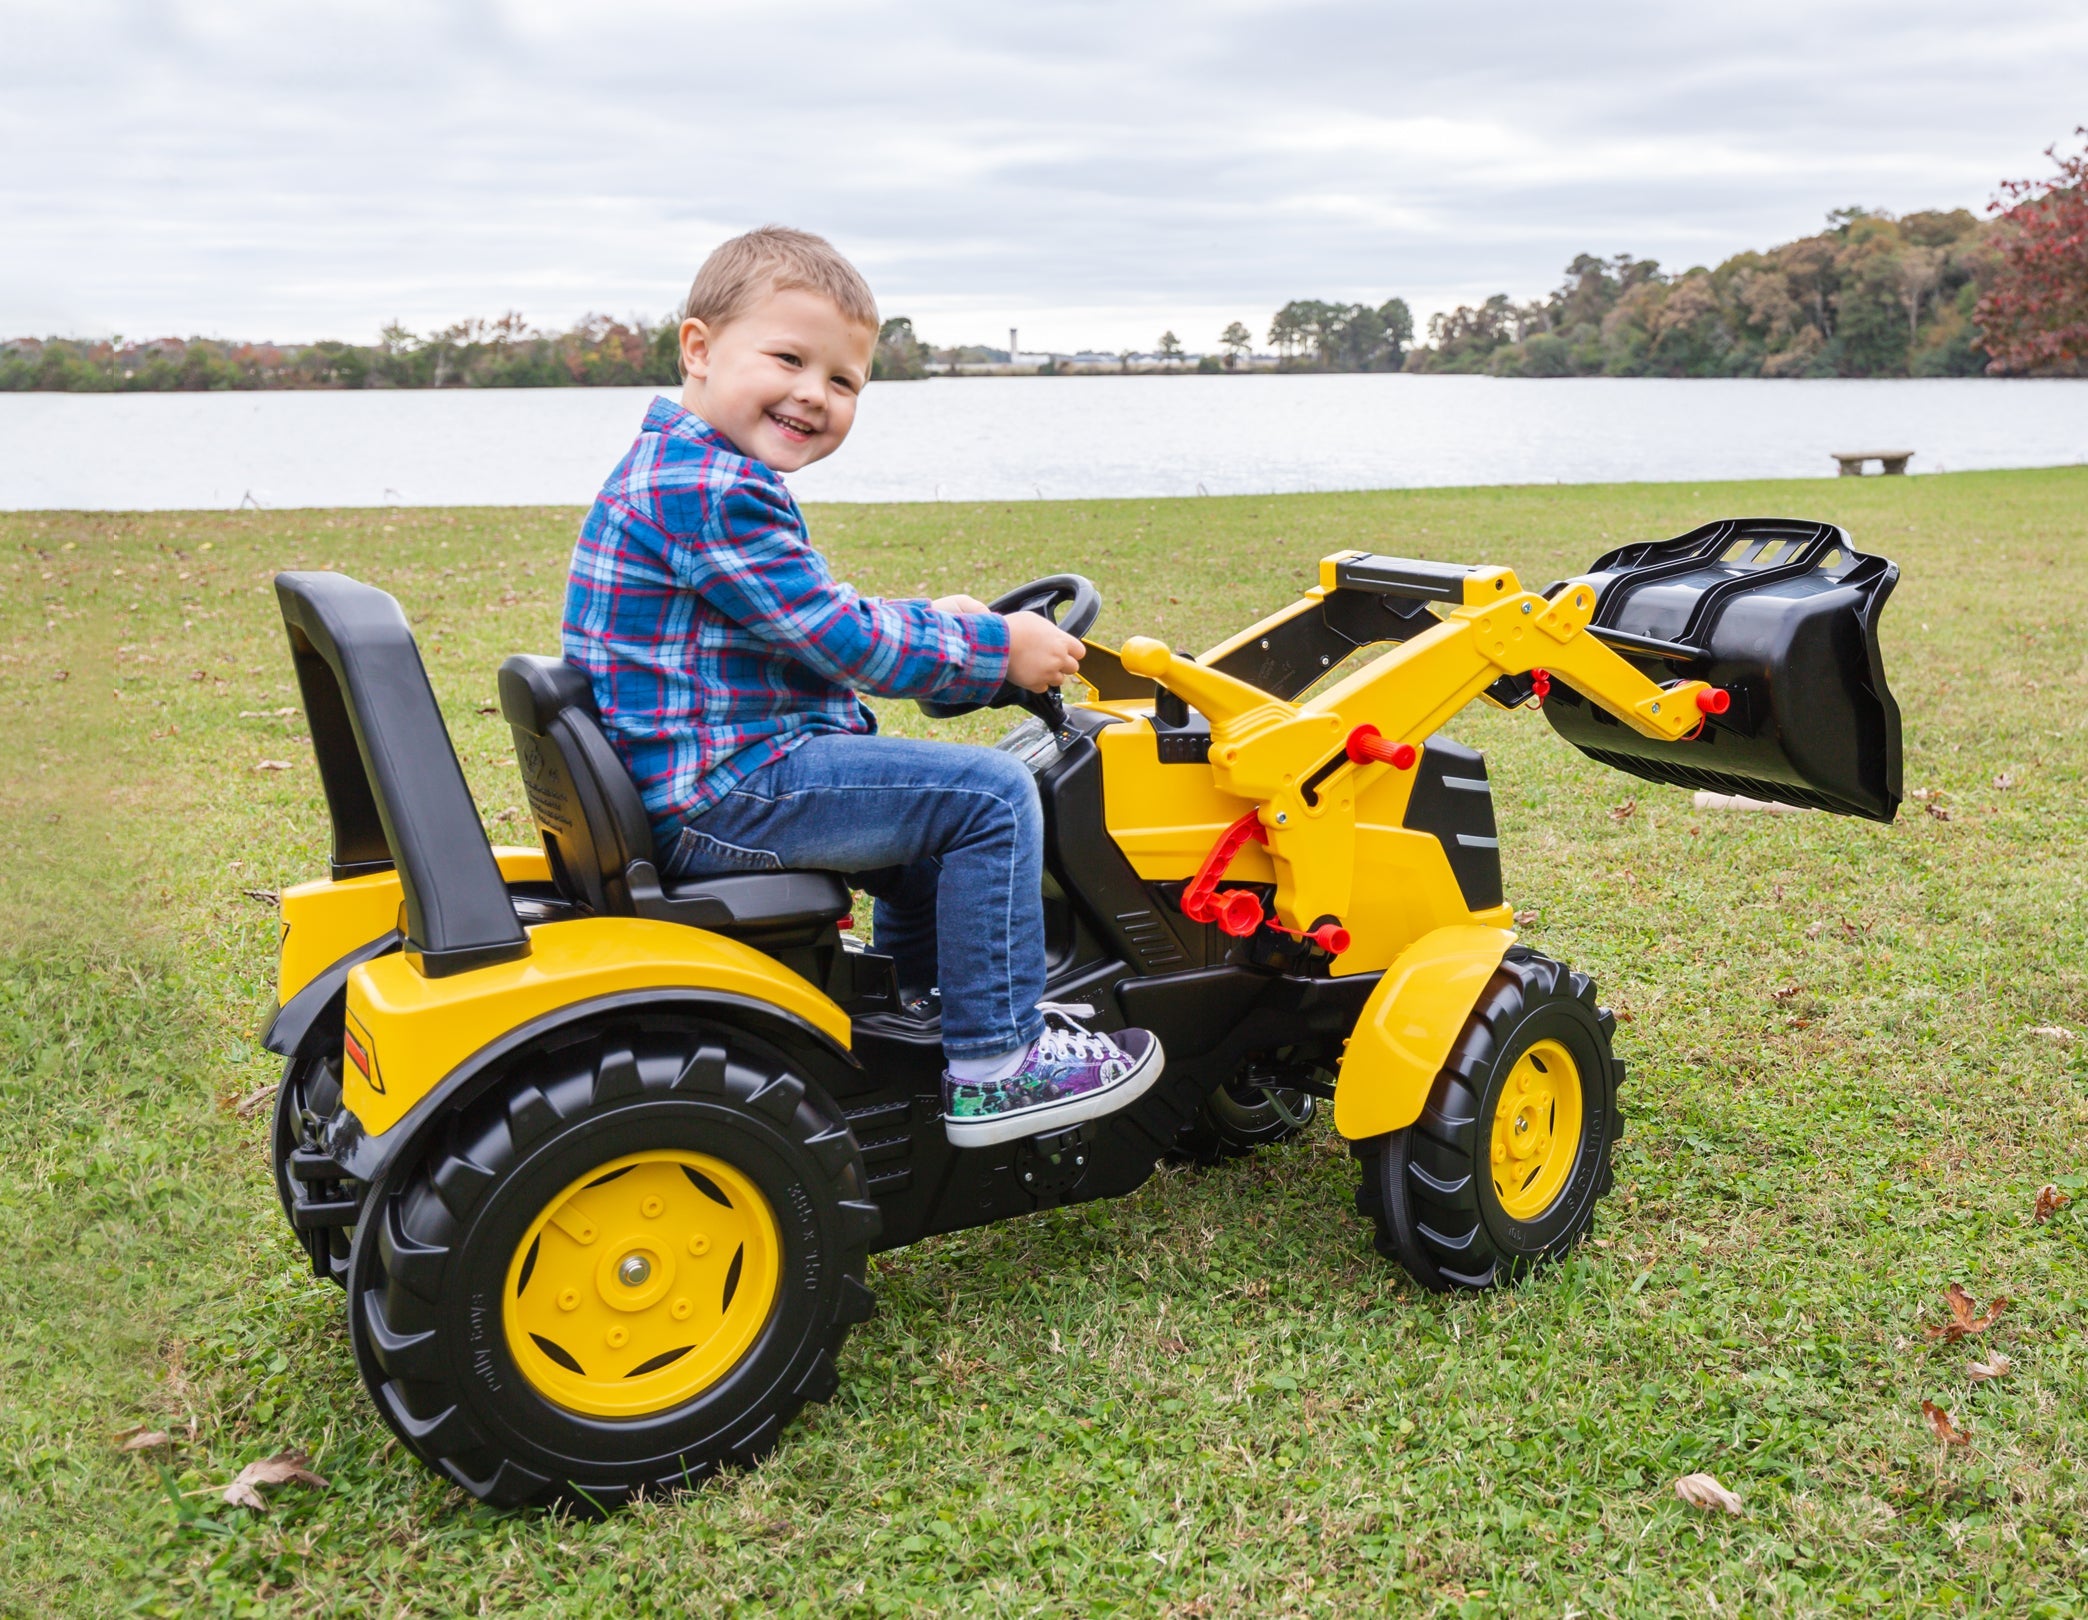 Child rides on toy tractor